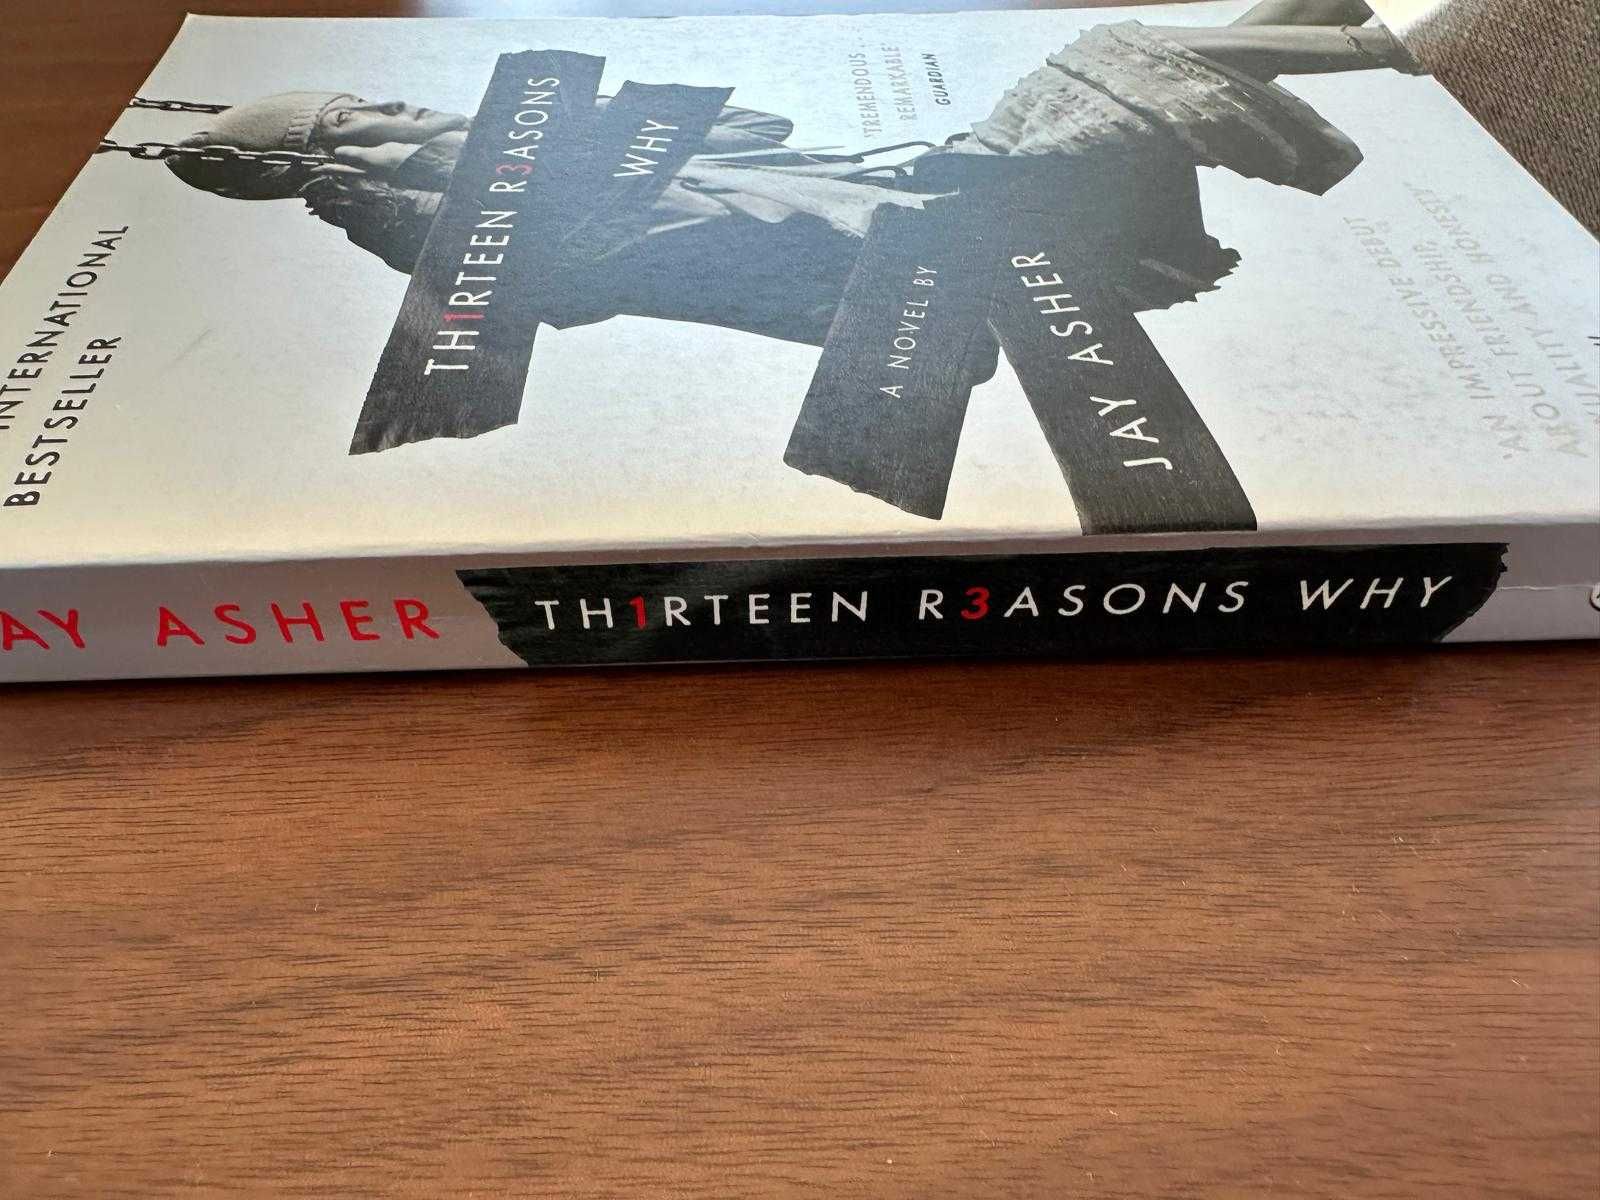 Th1rteen R3asons Why - Jay Asher